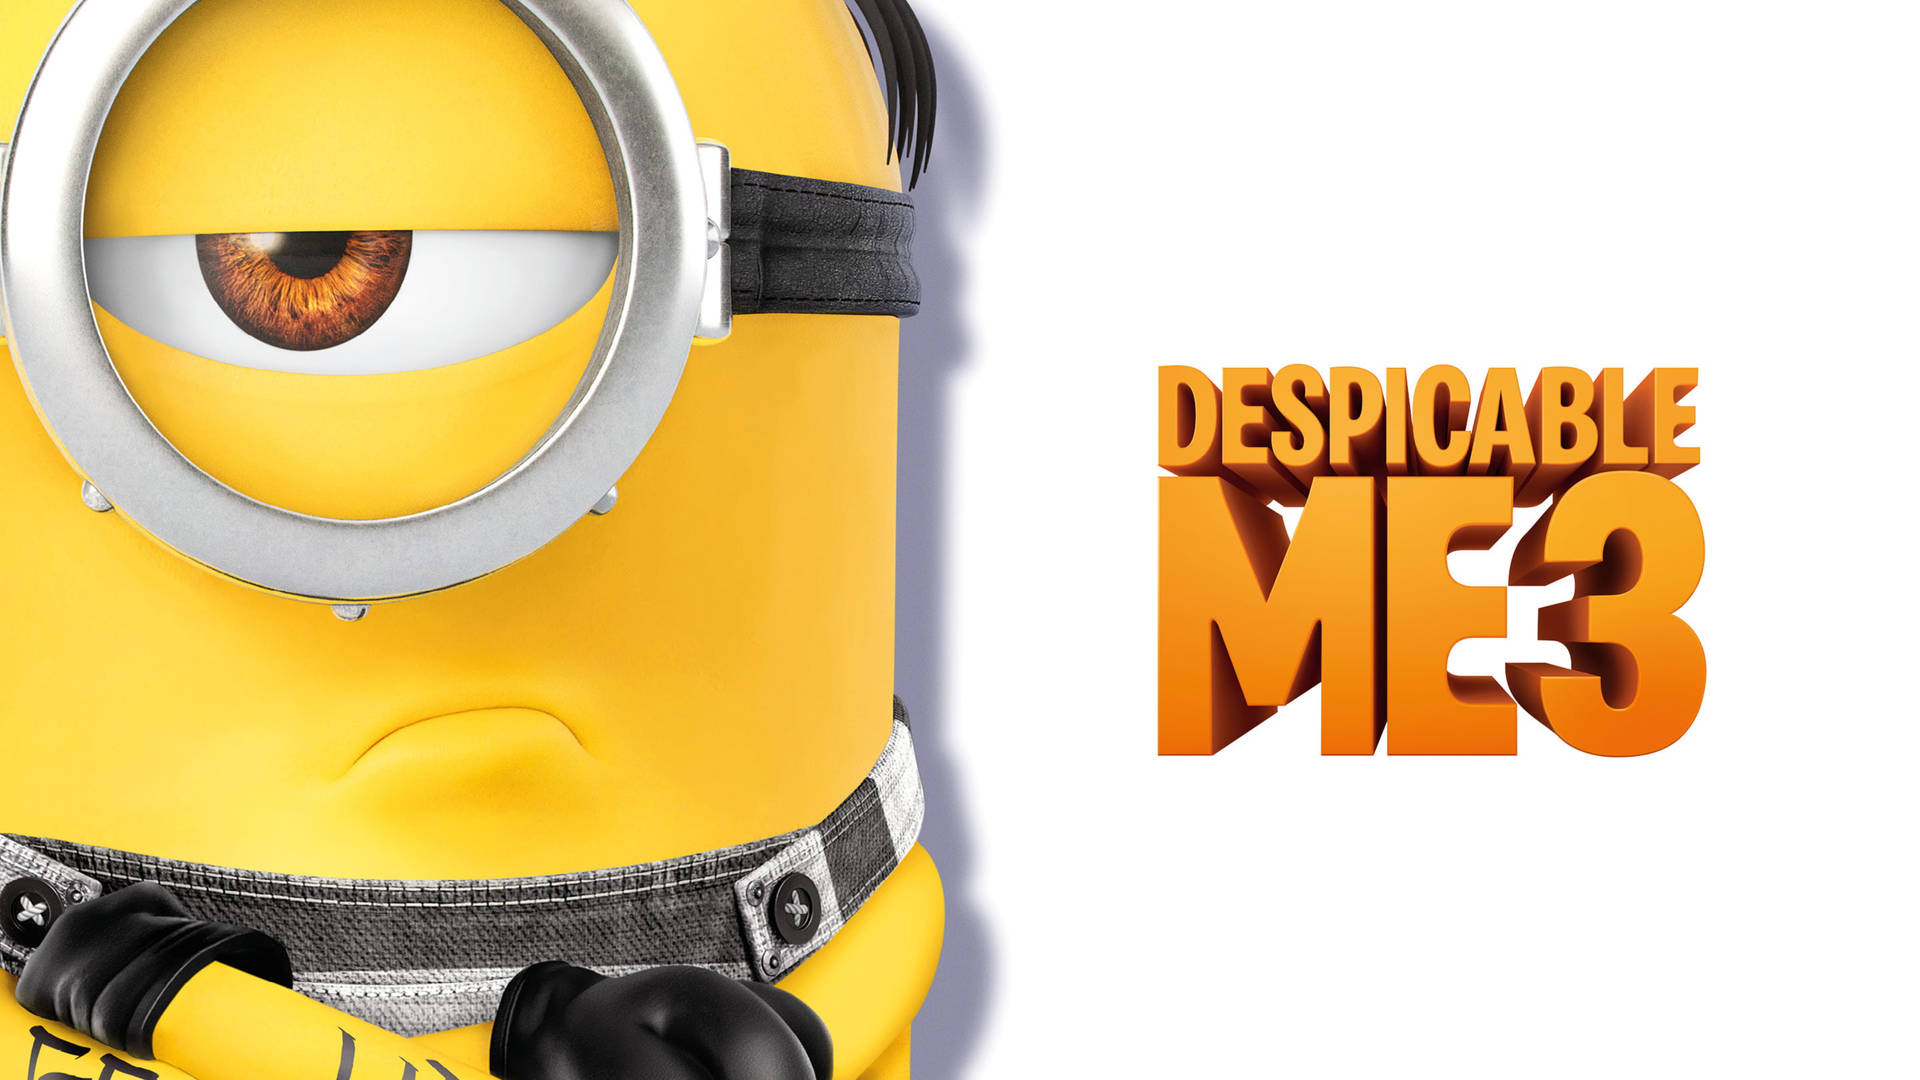 Despicable Me 3 Movie Poster Wallpaper